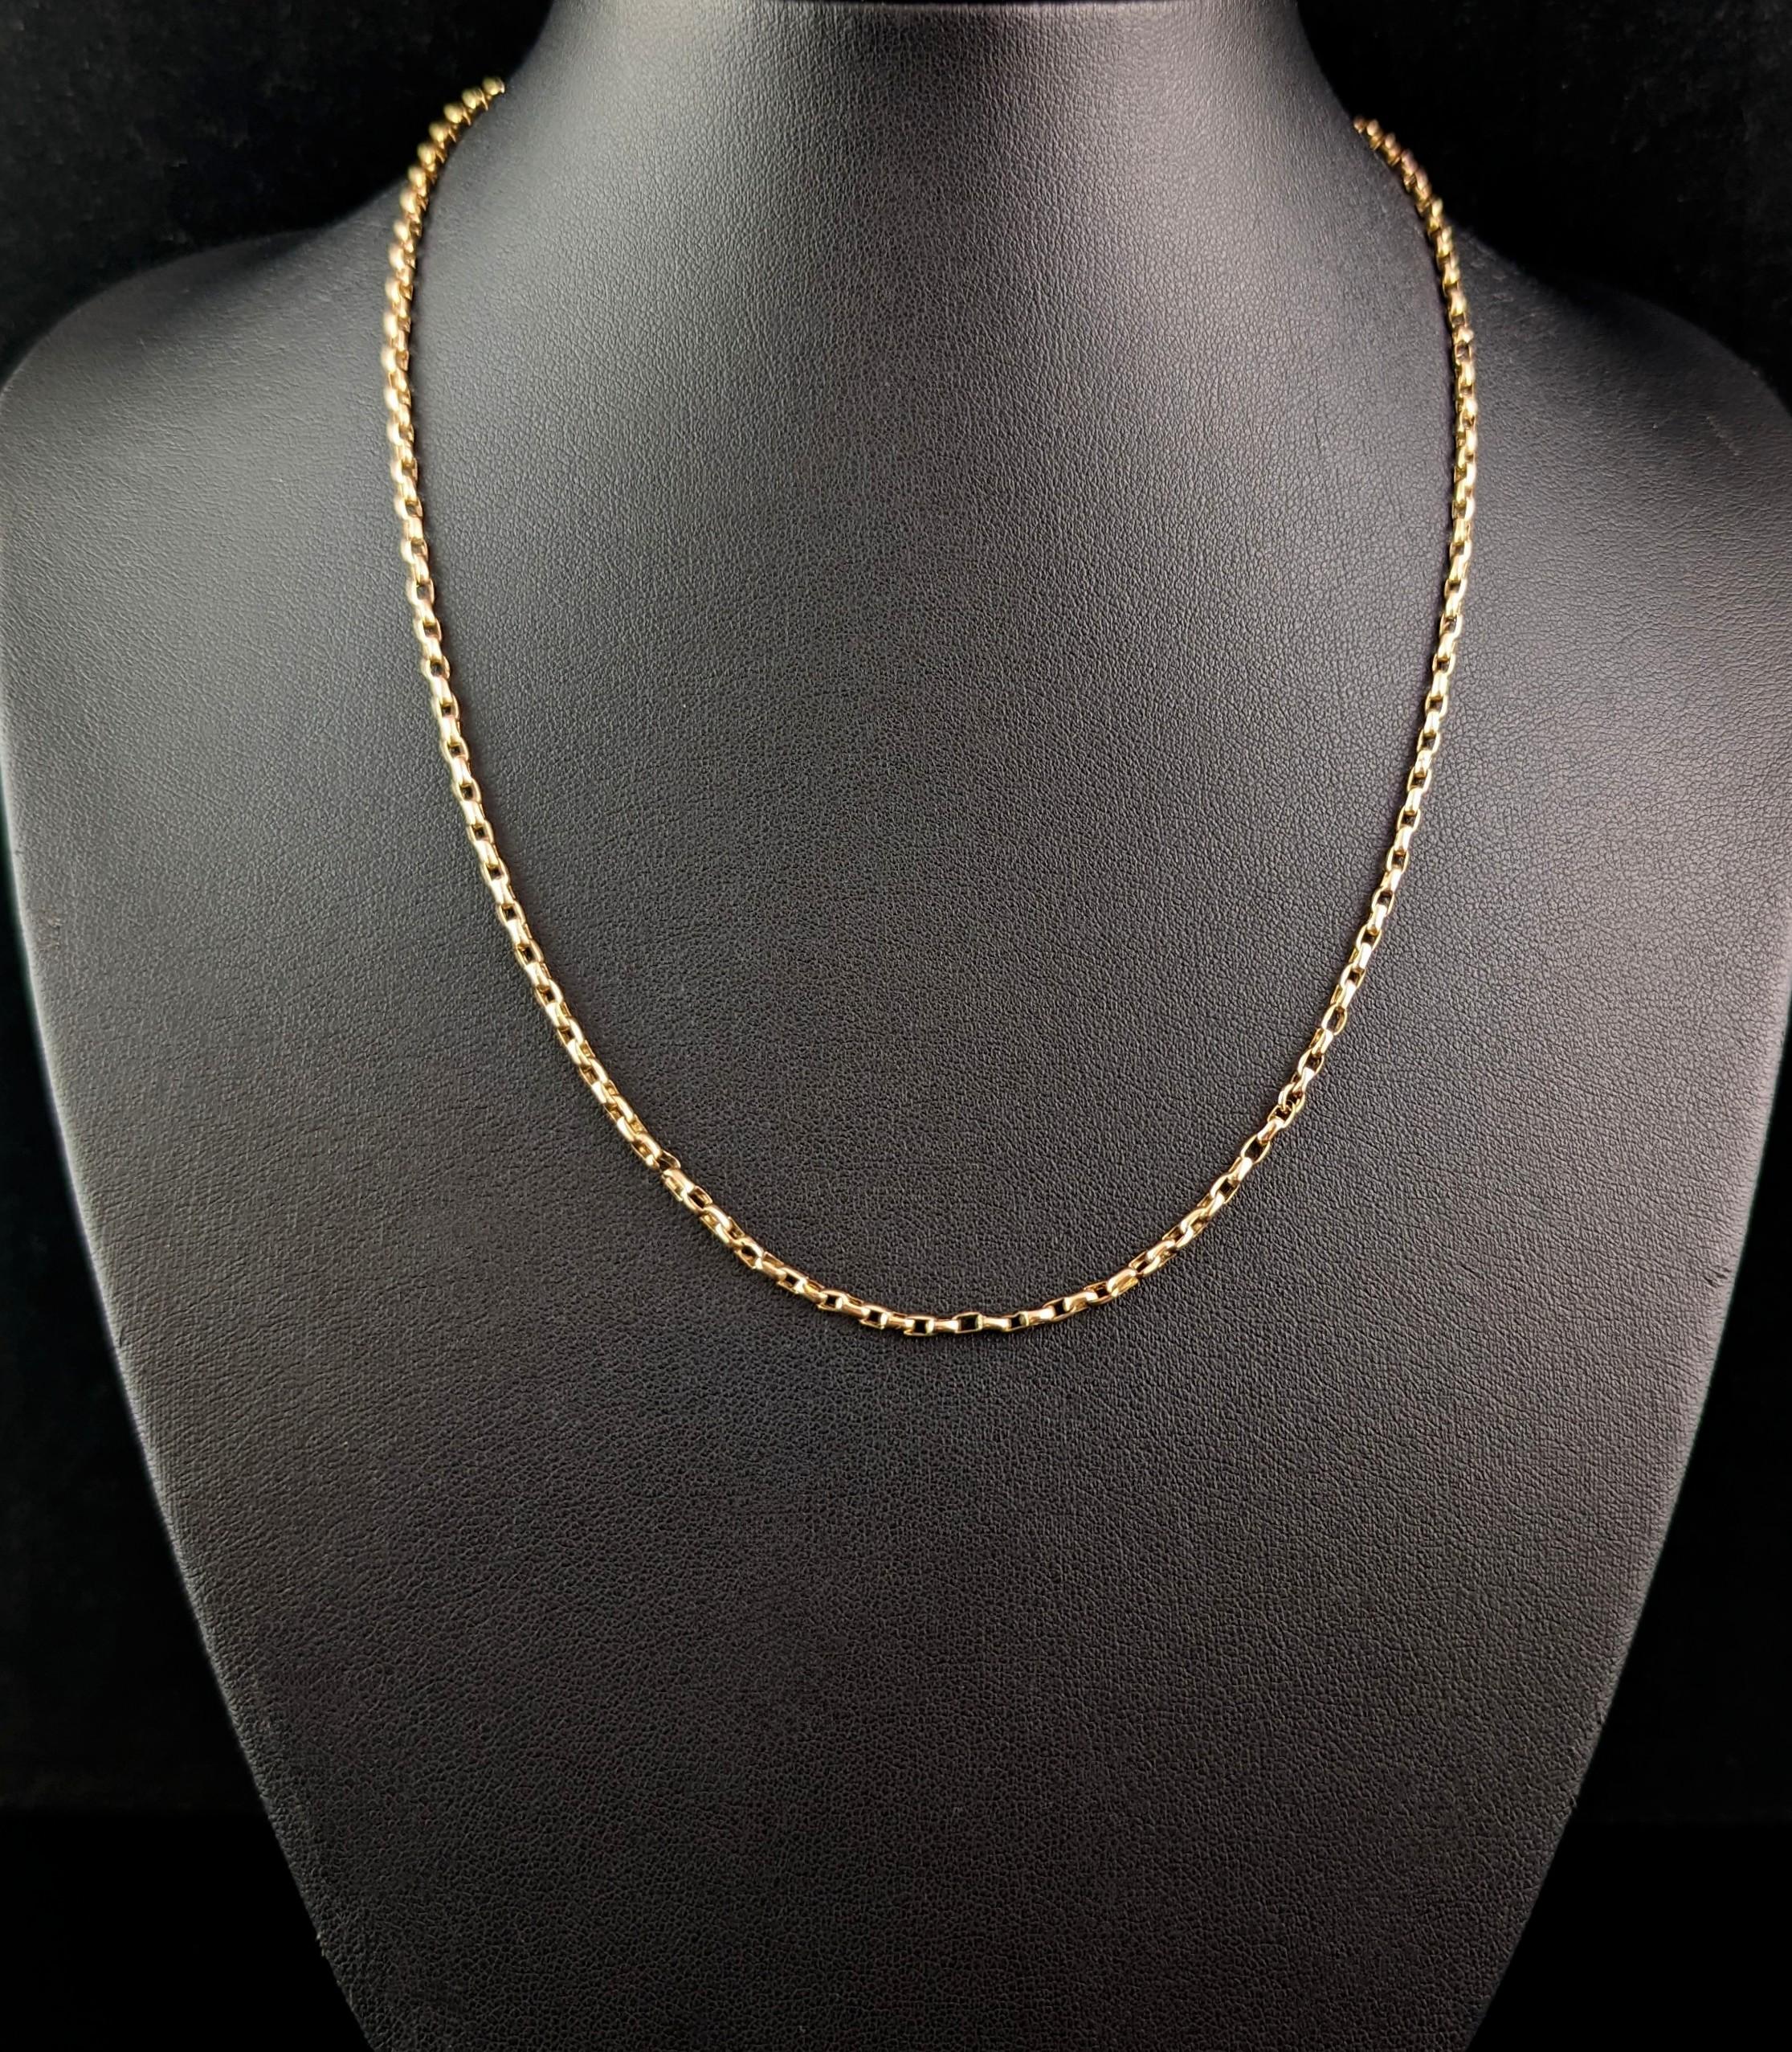 An antique gold chain is such an important staple for all jewellery collections, this gorgeous antique 9ct gold squared belcher link chain is perfect for the job.

Rectangular style belcher links in a rich 9ct yellow gold in a nice wearable